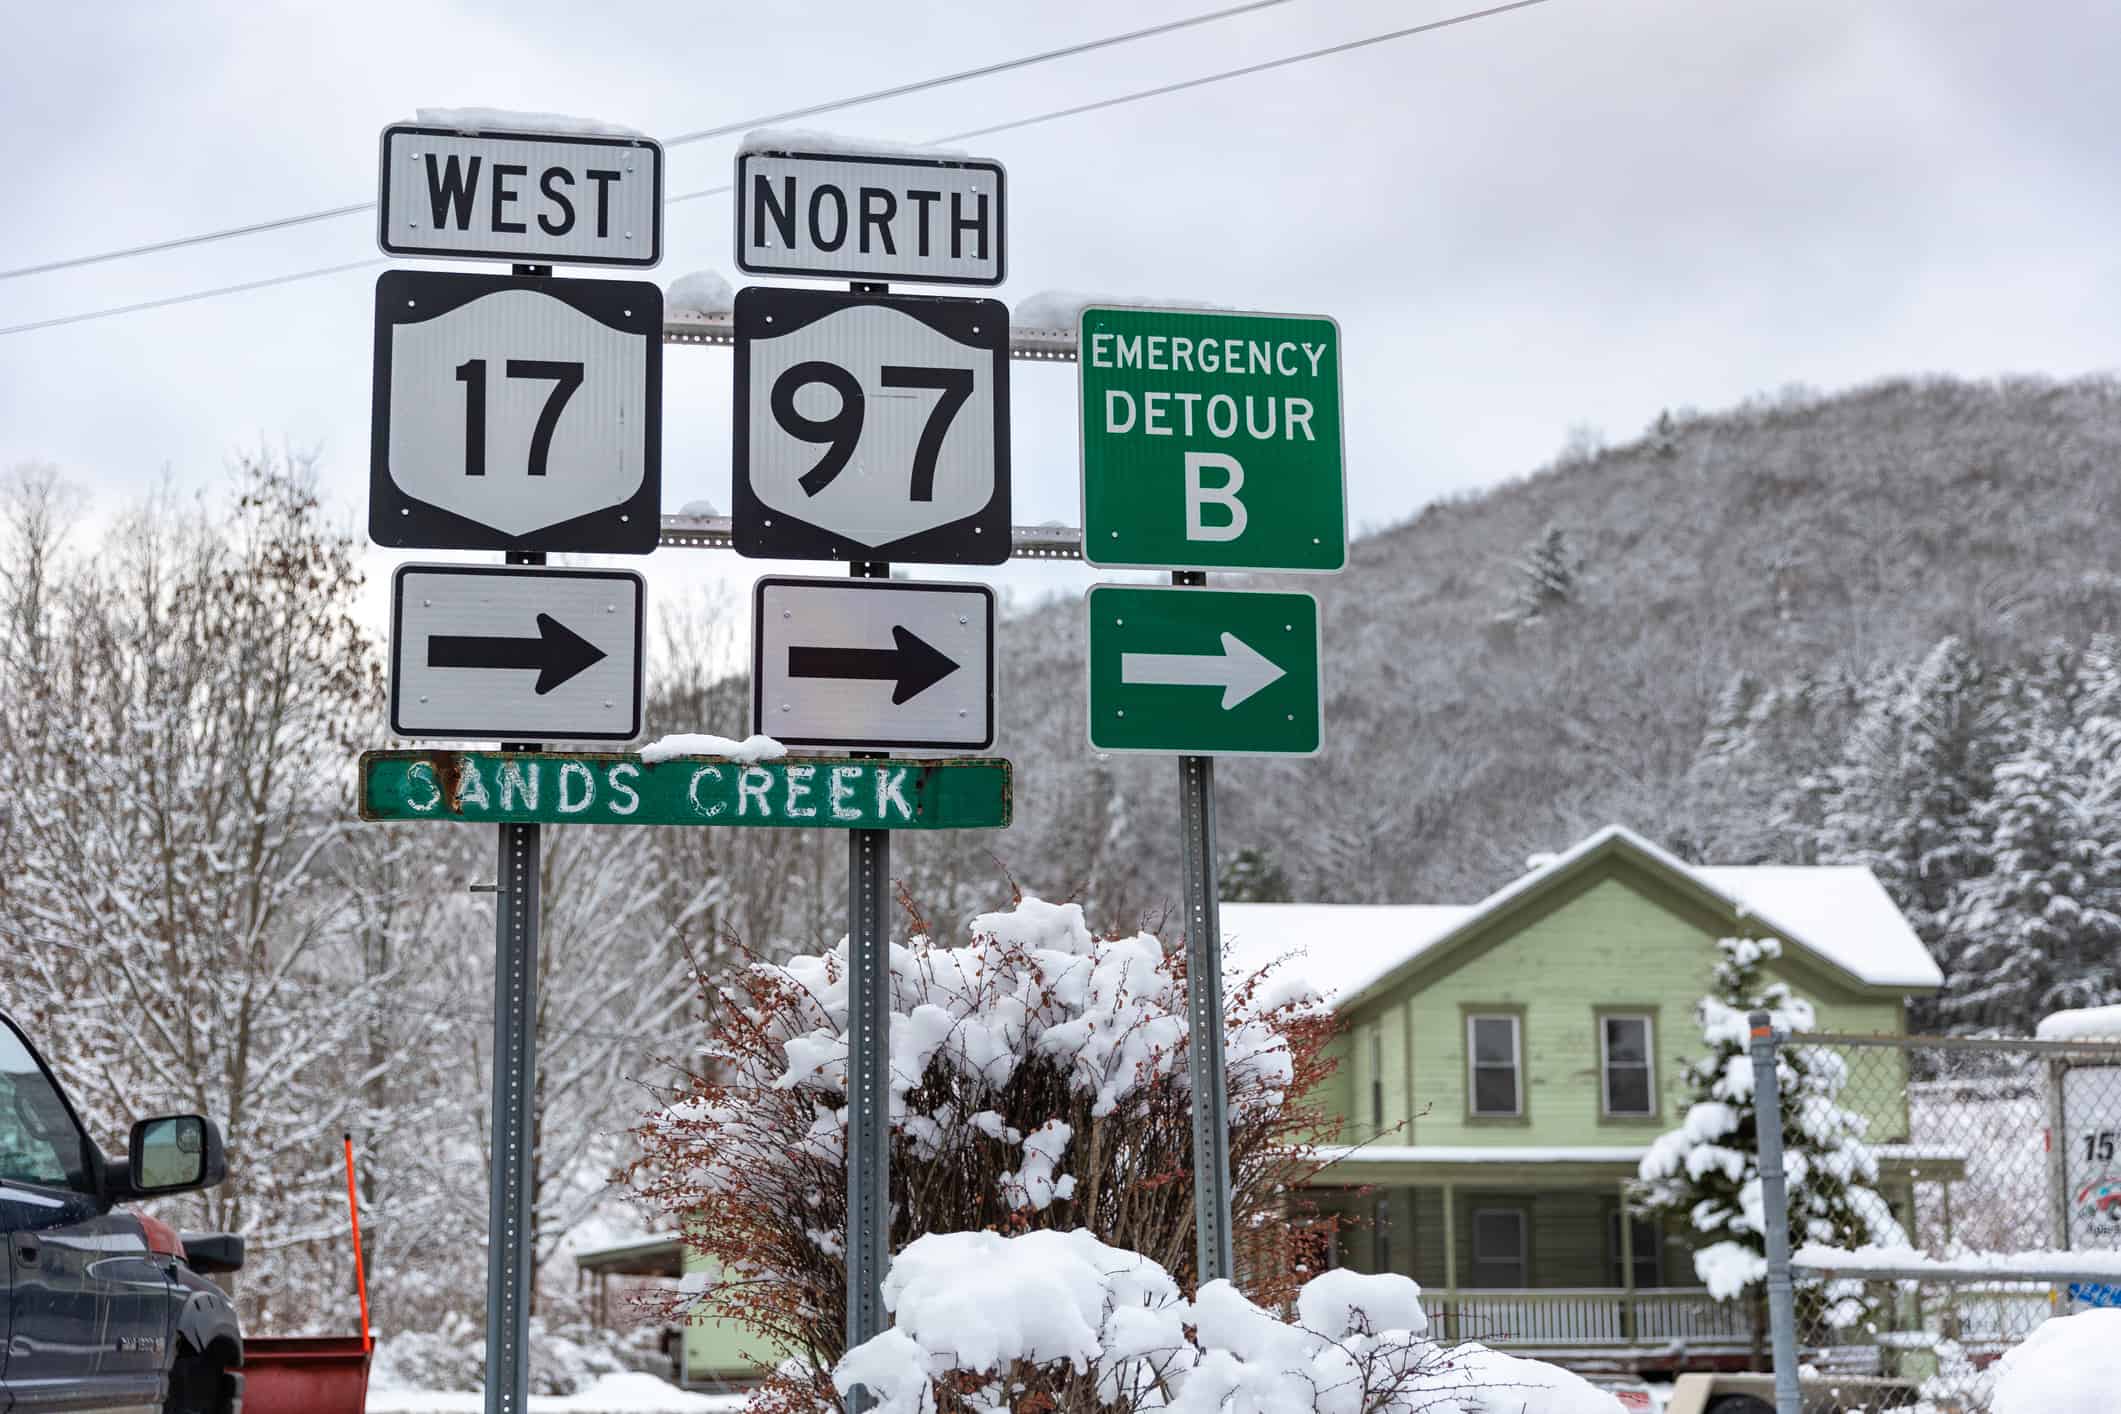 Road signage on a snowy afternoon in upstate New York. Route 17 and route 97 near Sands Creek